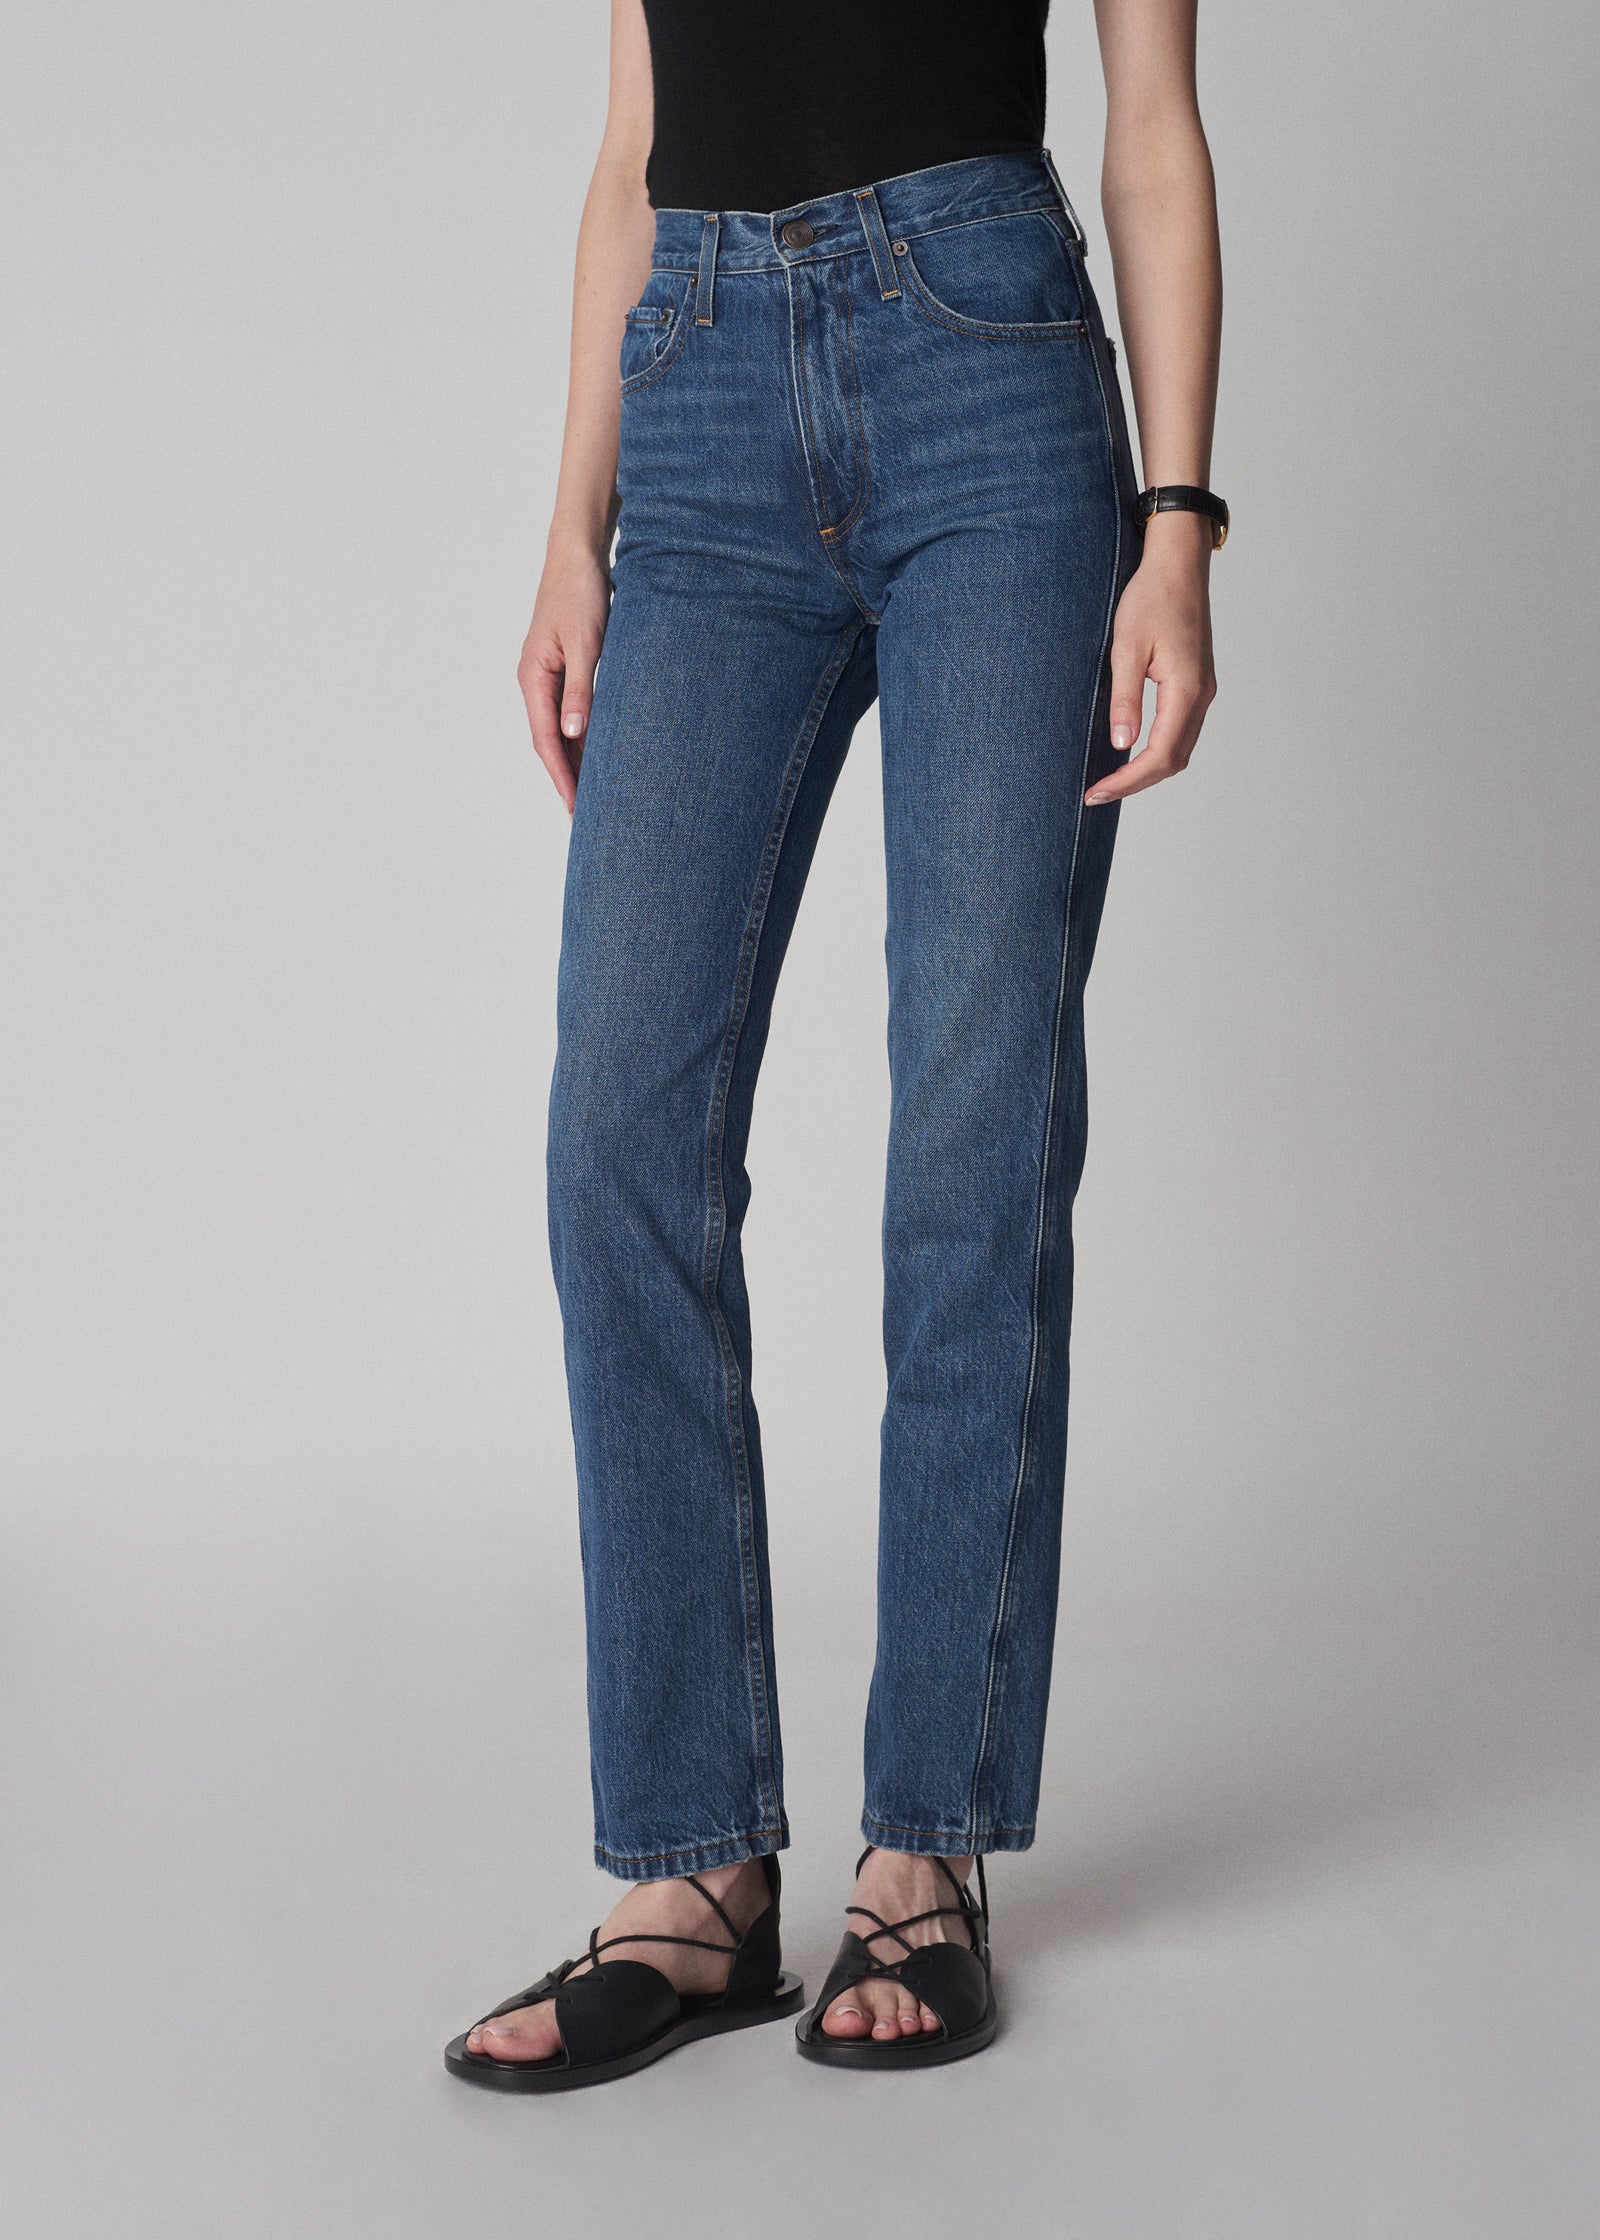 Hybrid & Co. Skinny Jeans Are Incredibly Flattering | Us Weekly